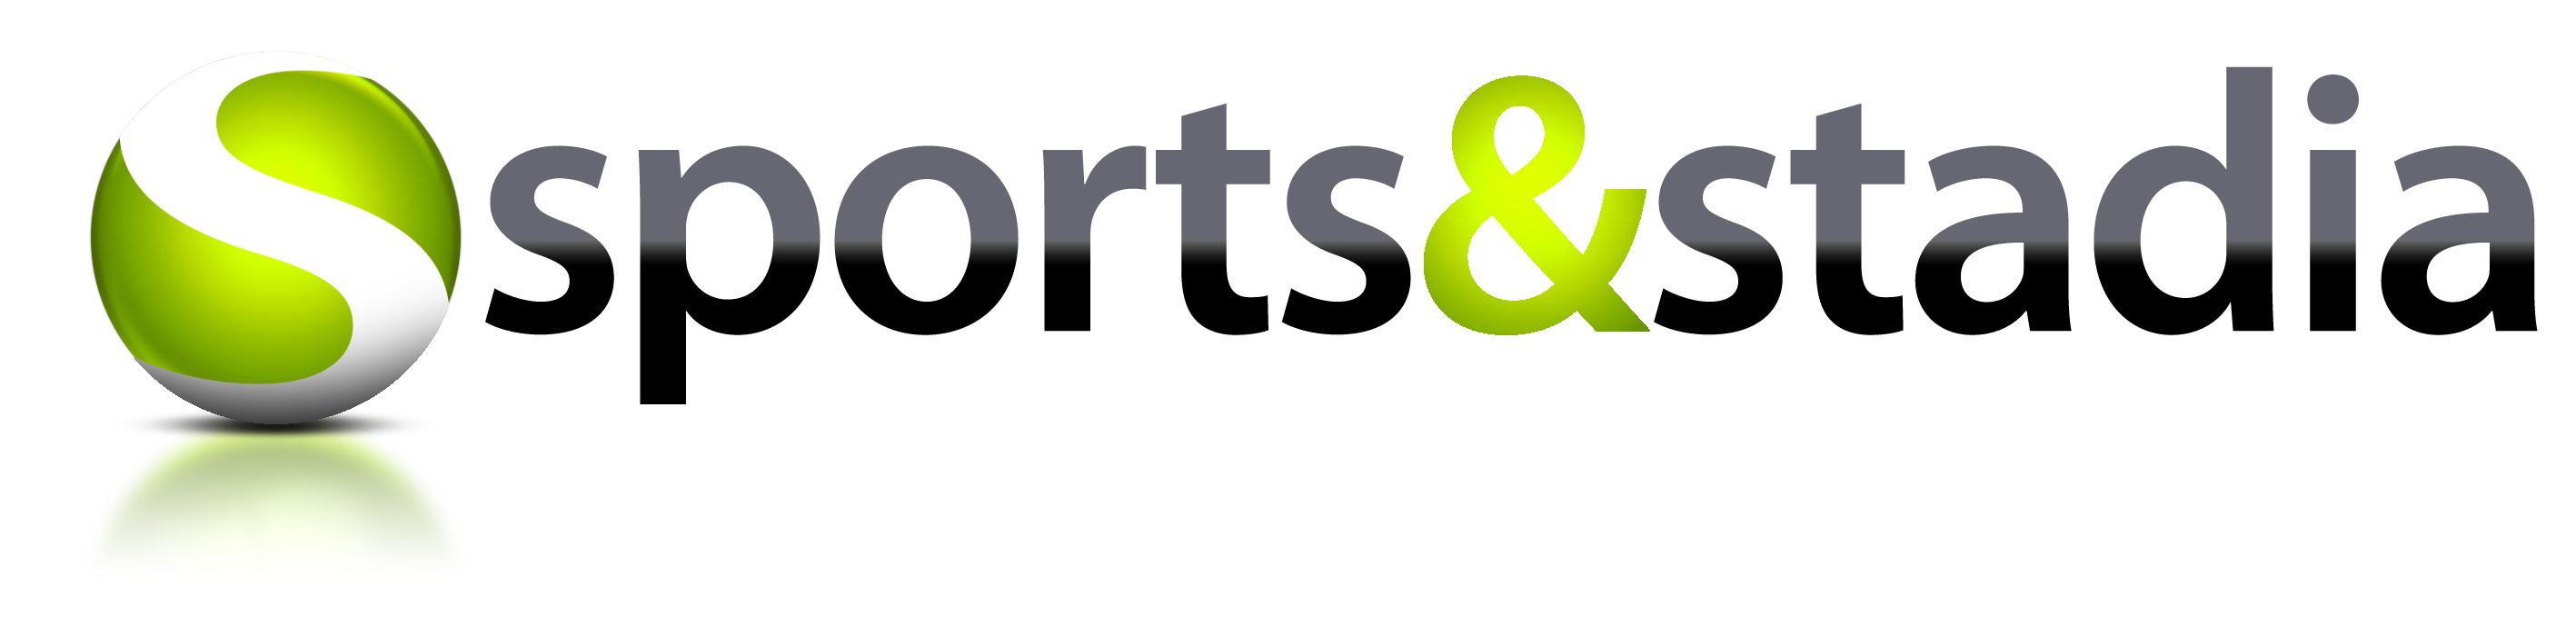 Sports & Stadia Services